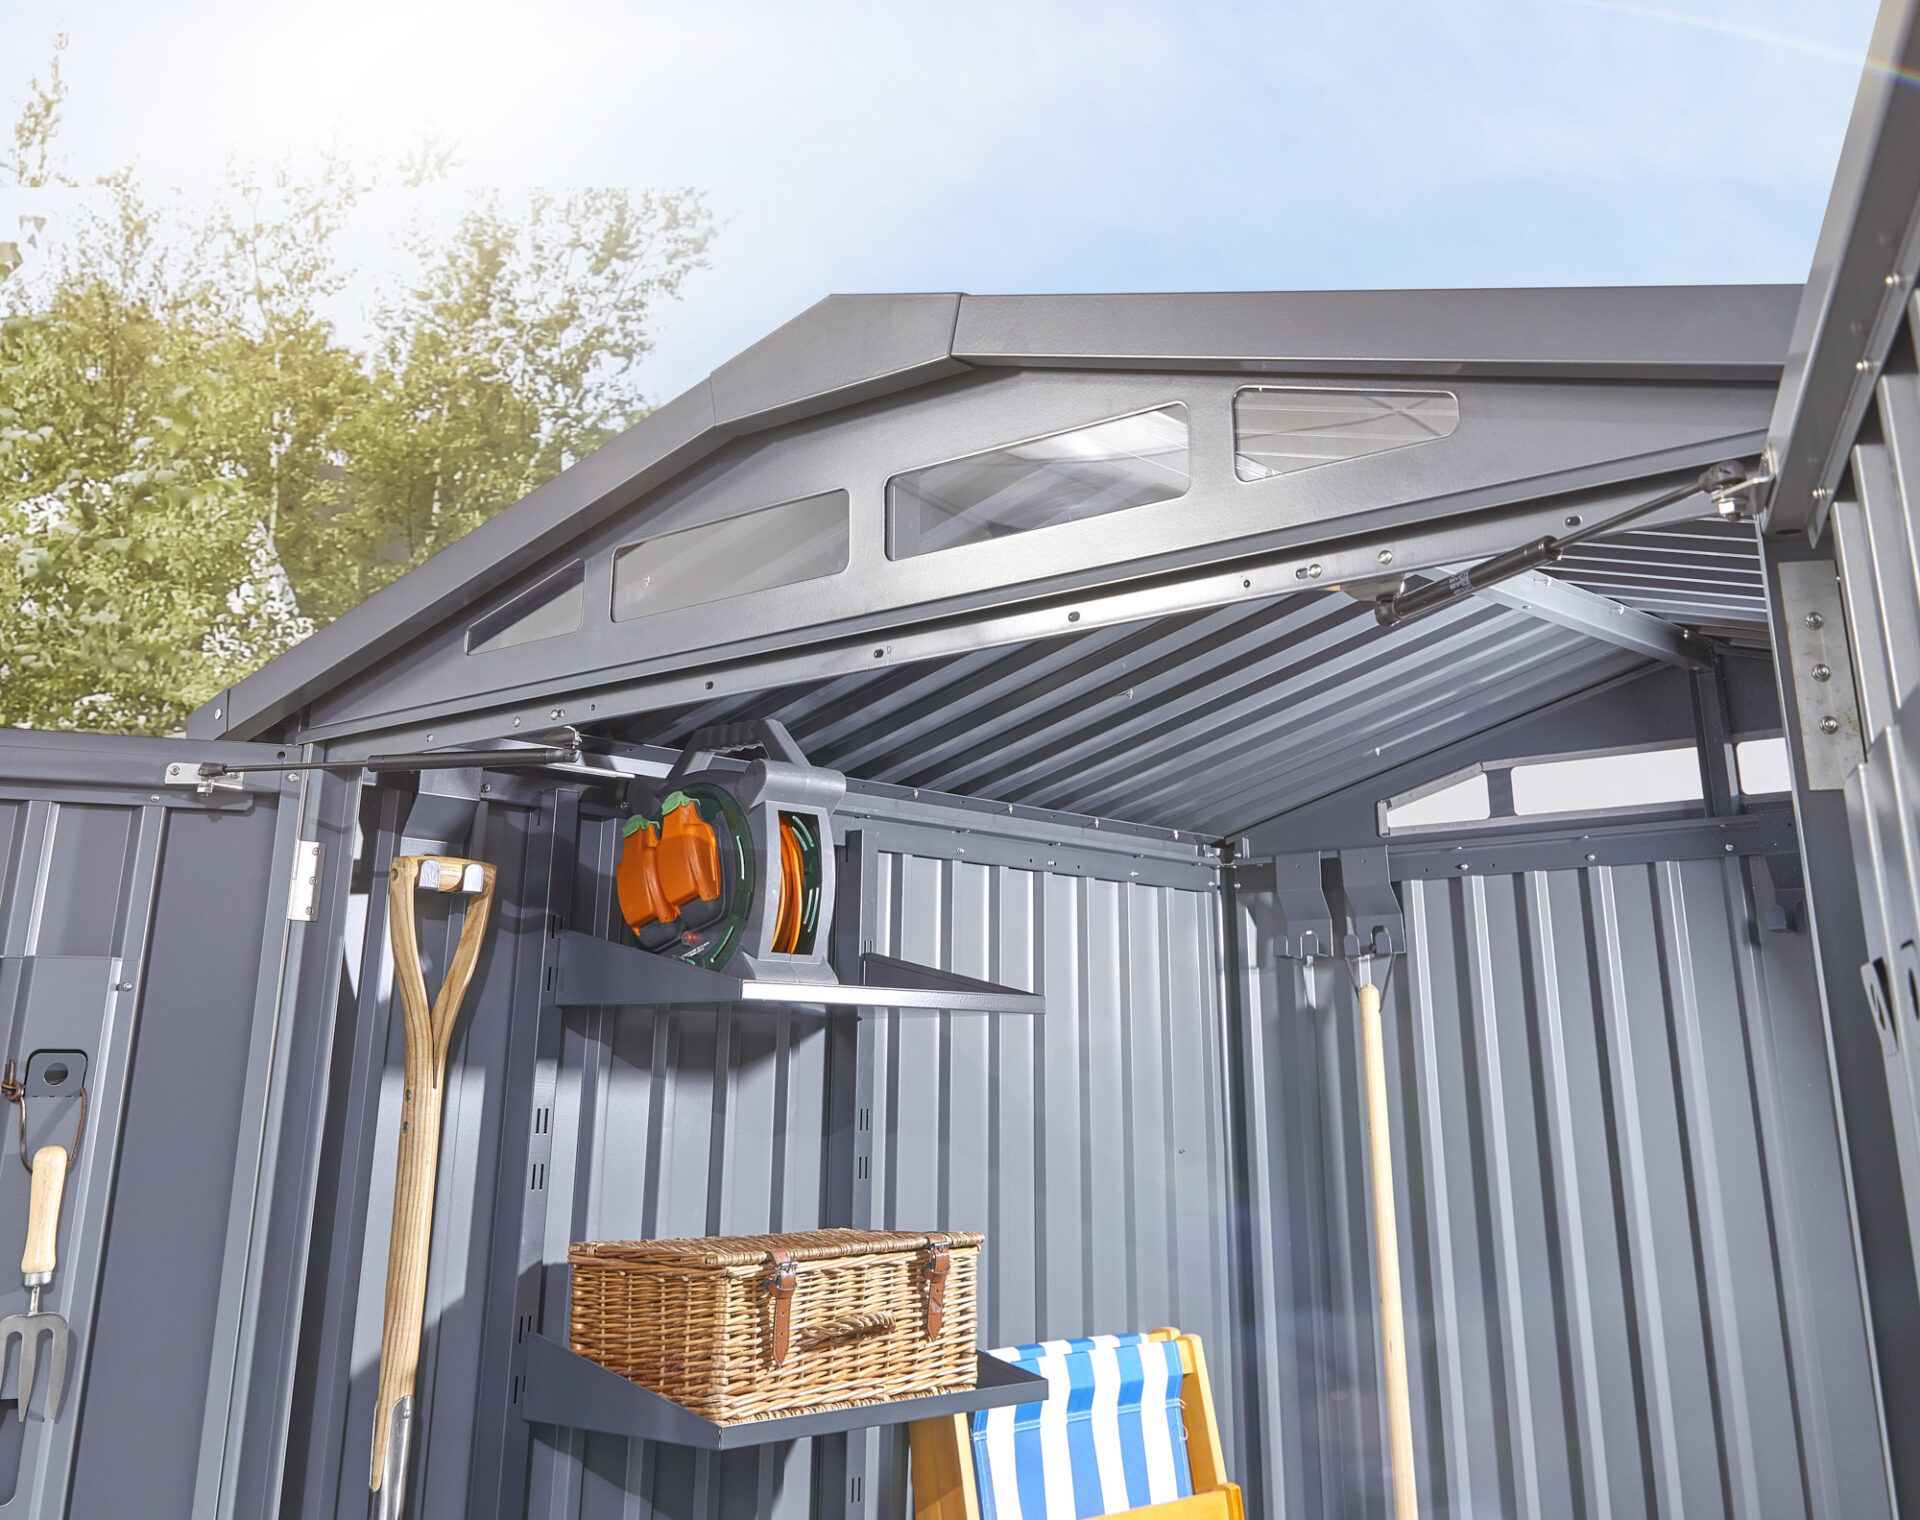 secure metal shed